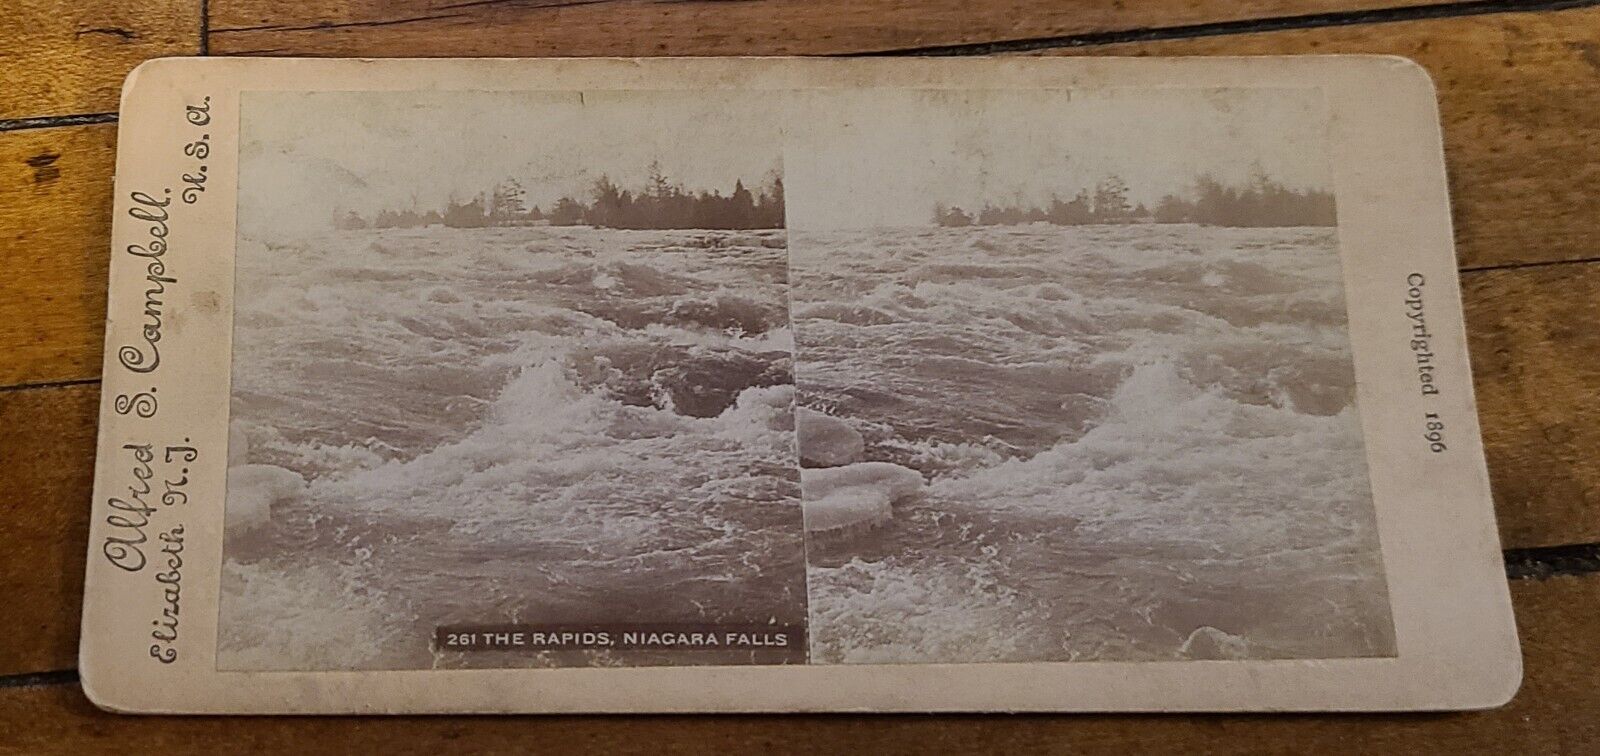 Antique 1896 Alfred S Campbell Stereoview Card The Rapids Niagara Falls